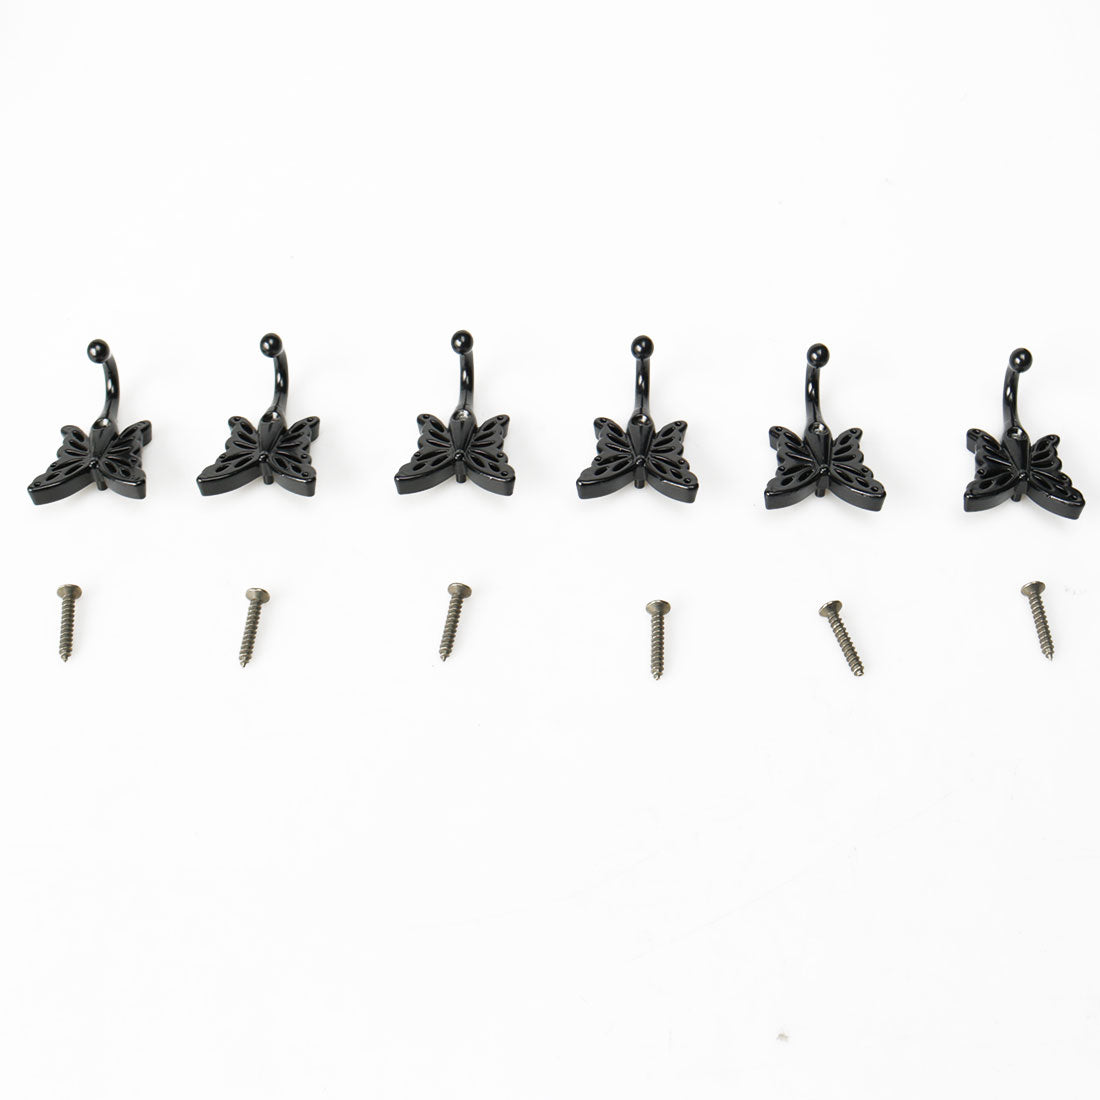 uxcell Uxcell 6pcs Robe Hooks Wall Mounted Zinc Alloy Coat Scarf DIY Hanger with Screws Black